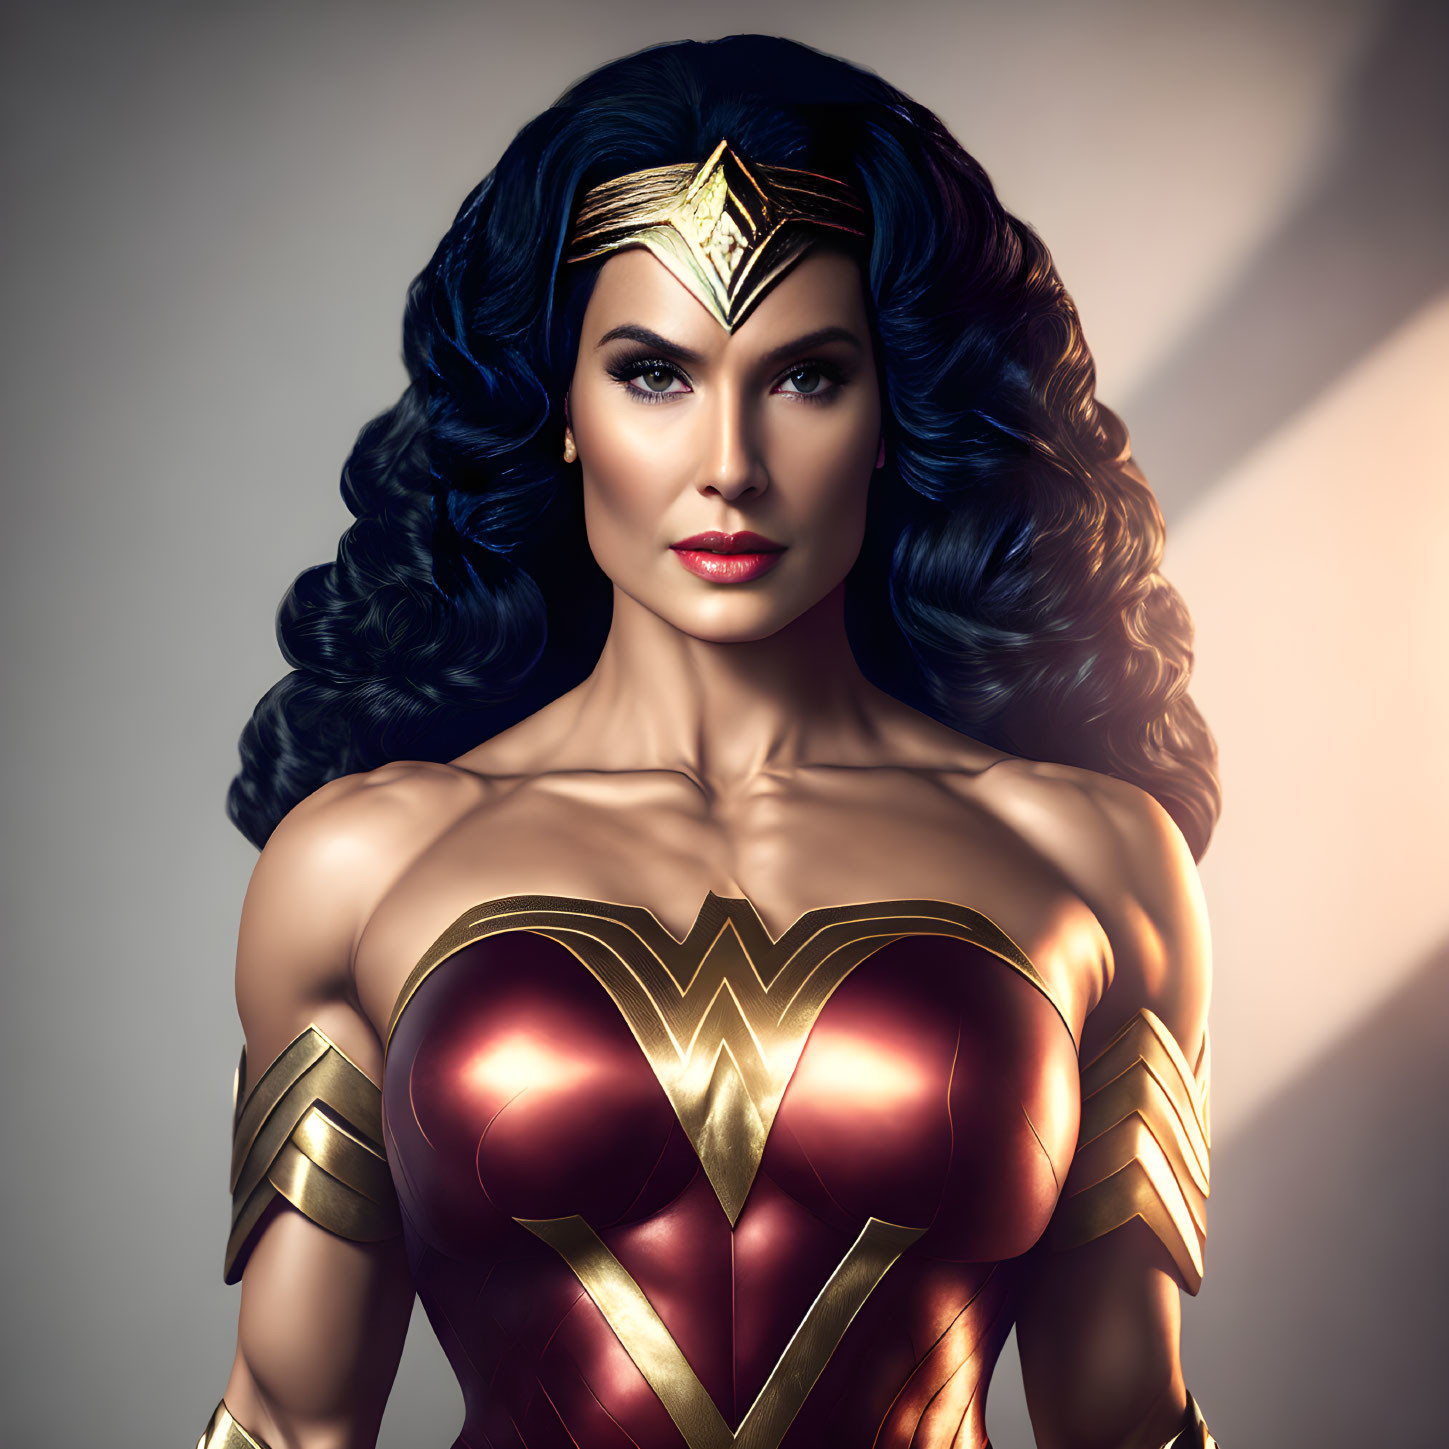 Female superhero with black hair in gold tiara and red costume